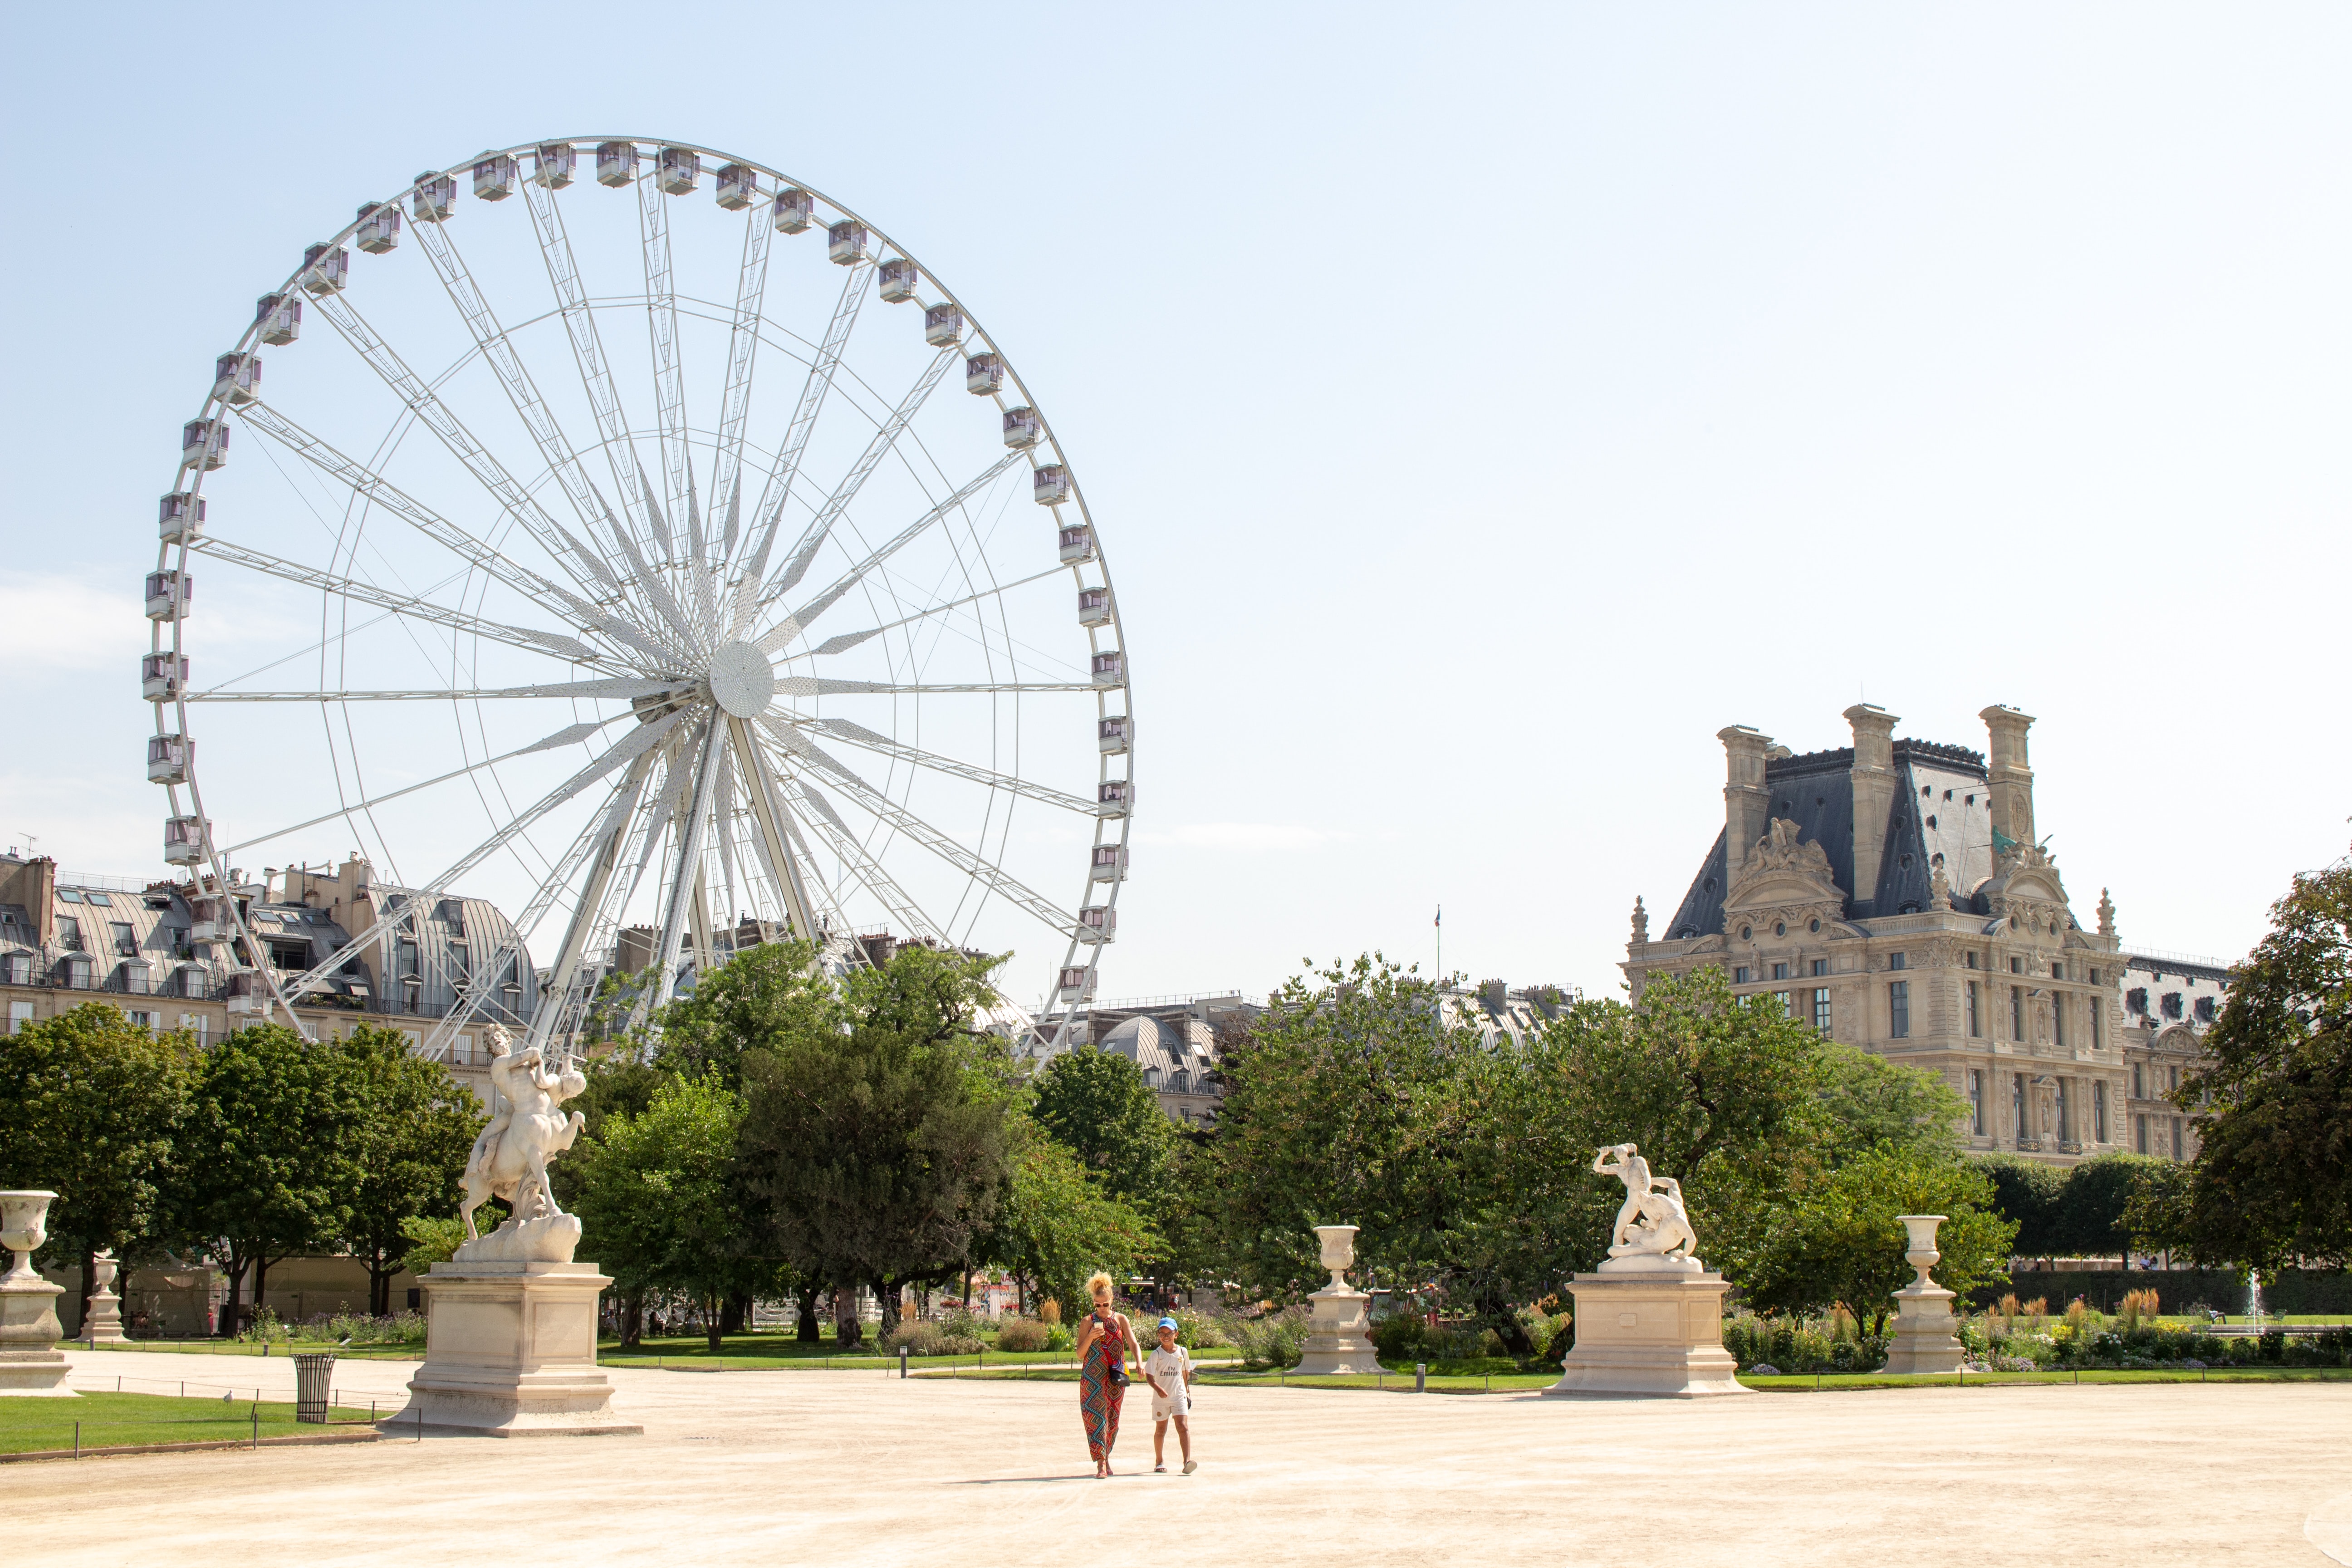 The park Jardin des Tuileries with a Ferris wheel, statues and part of the Louvre buildingl